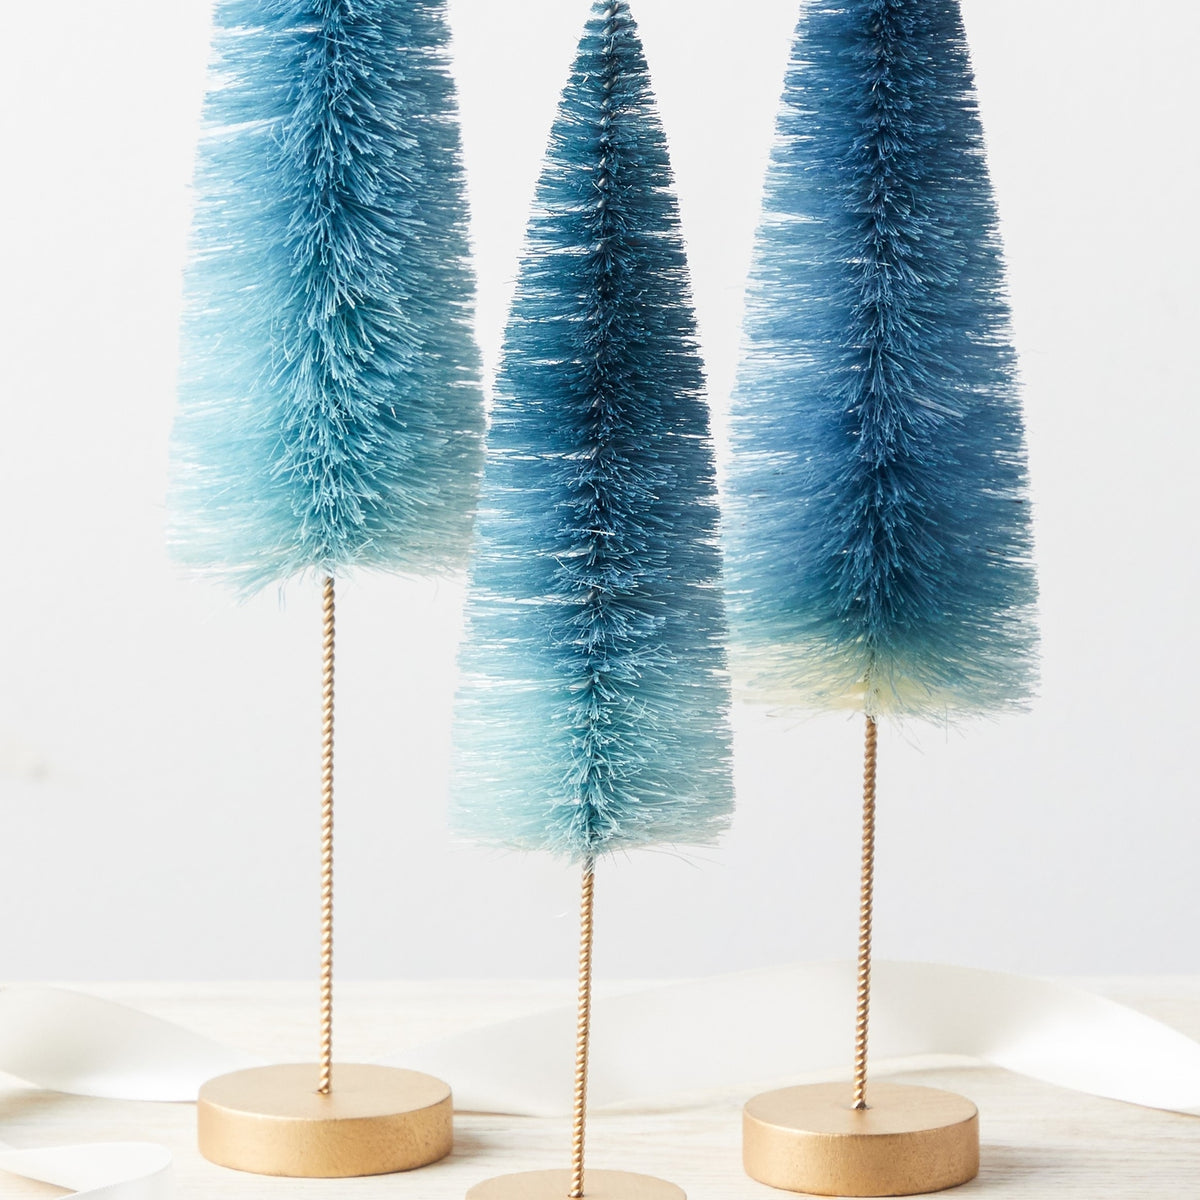 Set of 3 Bottle Brush Holiday Decor Trees in Blue Ombre with a Gold Base